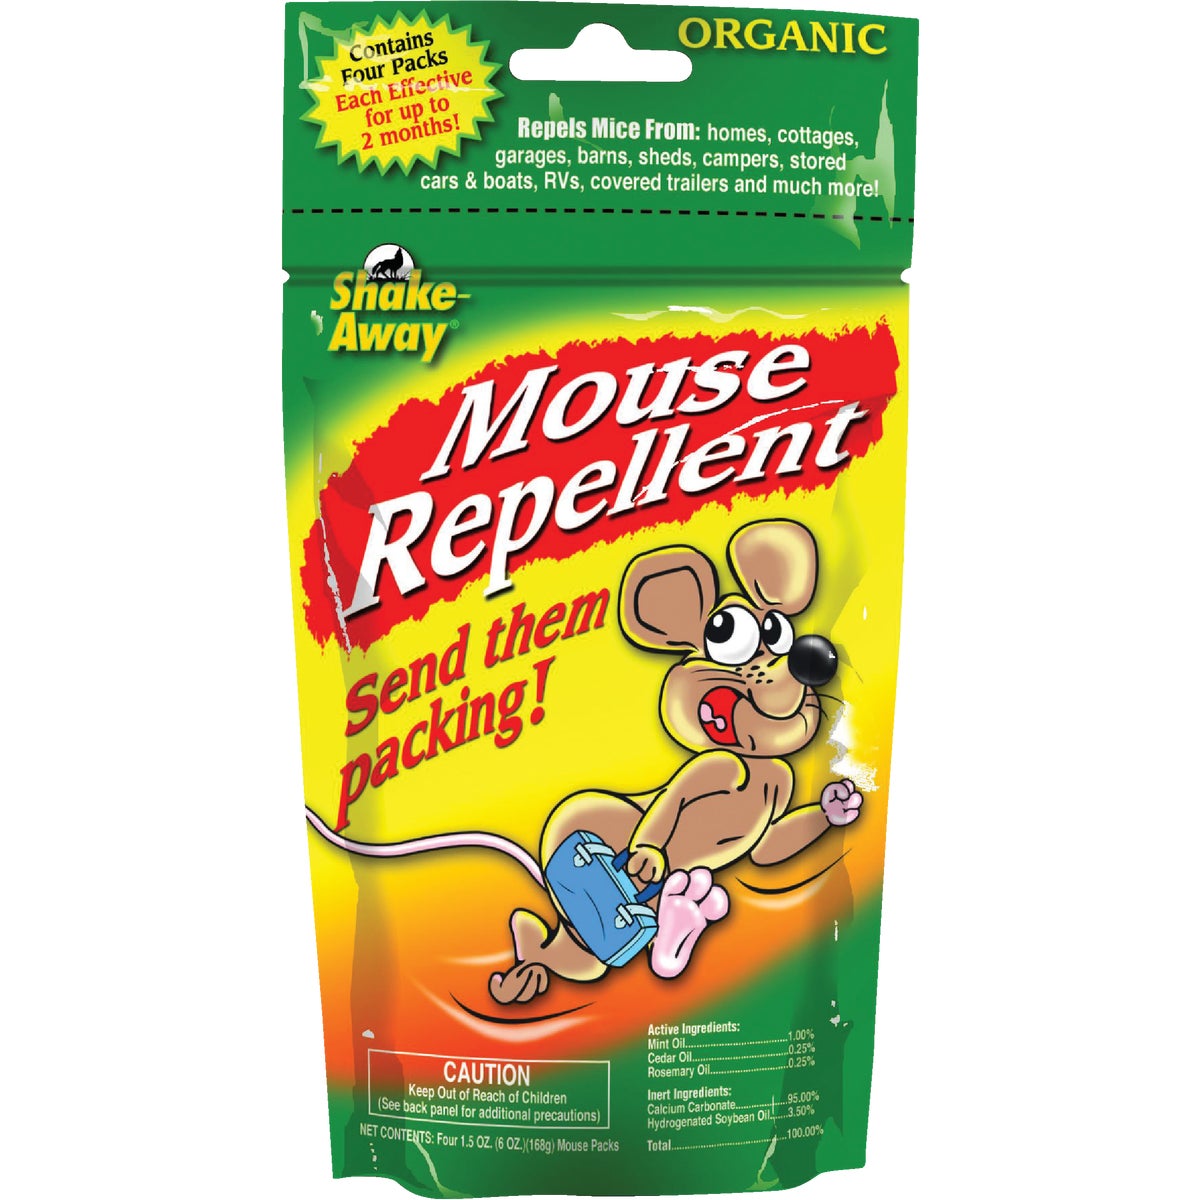 Item 702062, Non-kill method safely repels mice from homes, cottages, barns, sheds, 